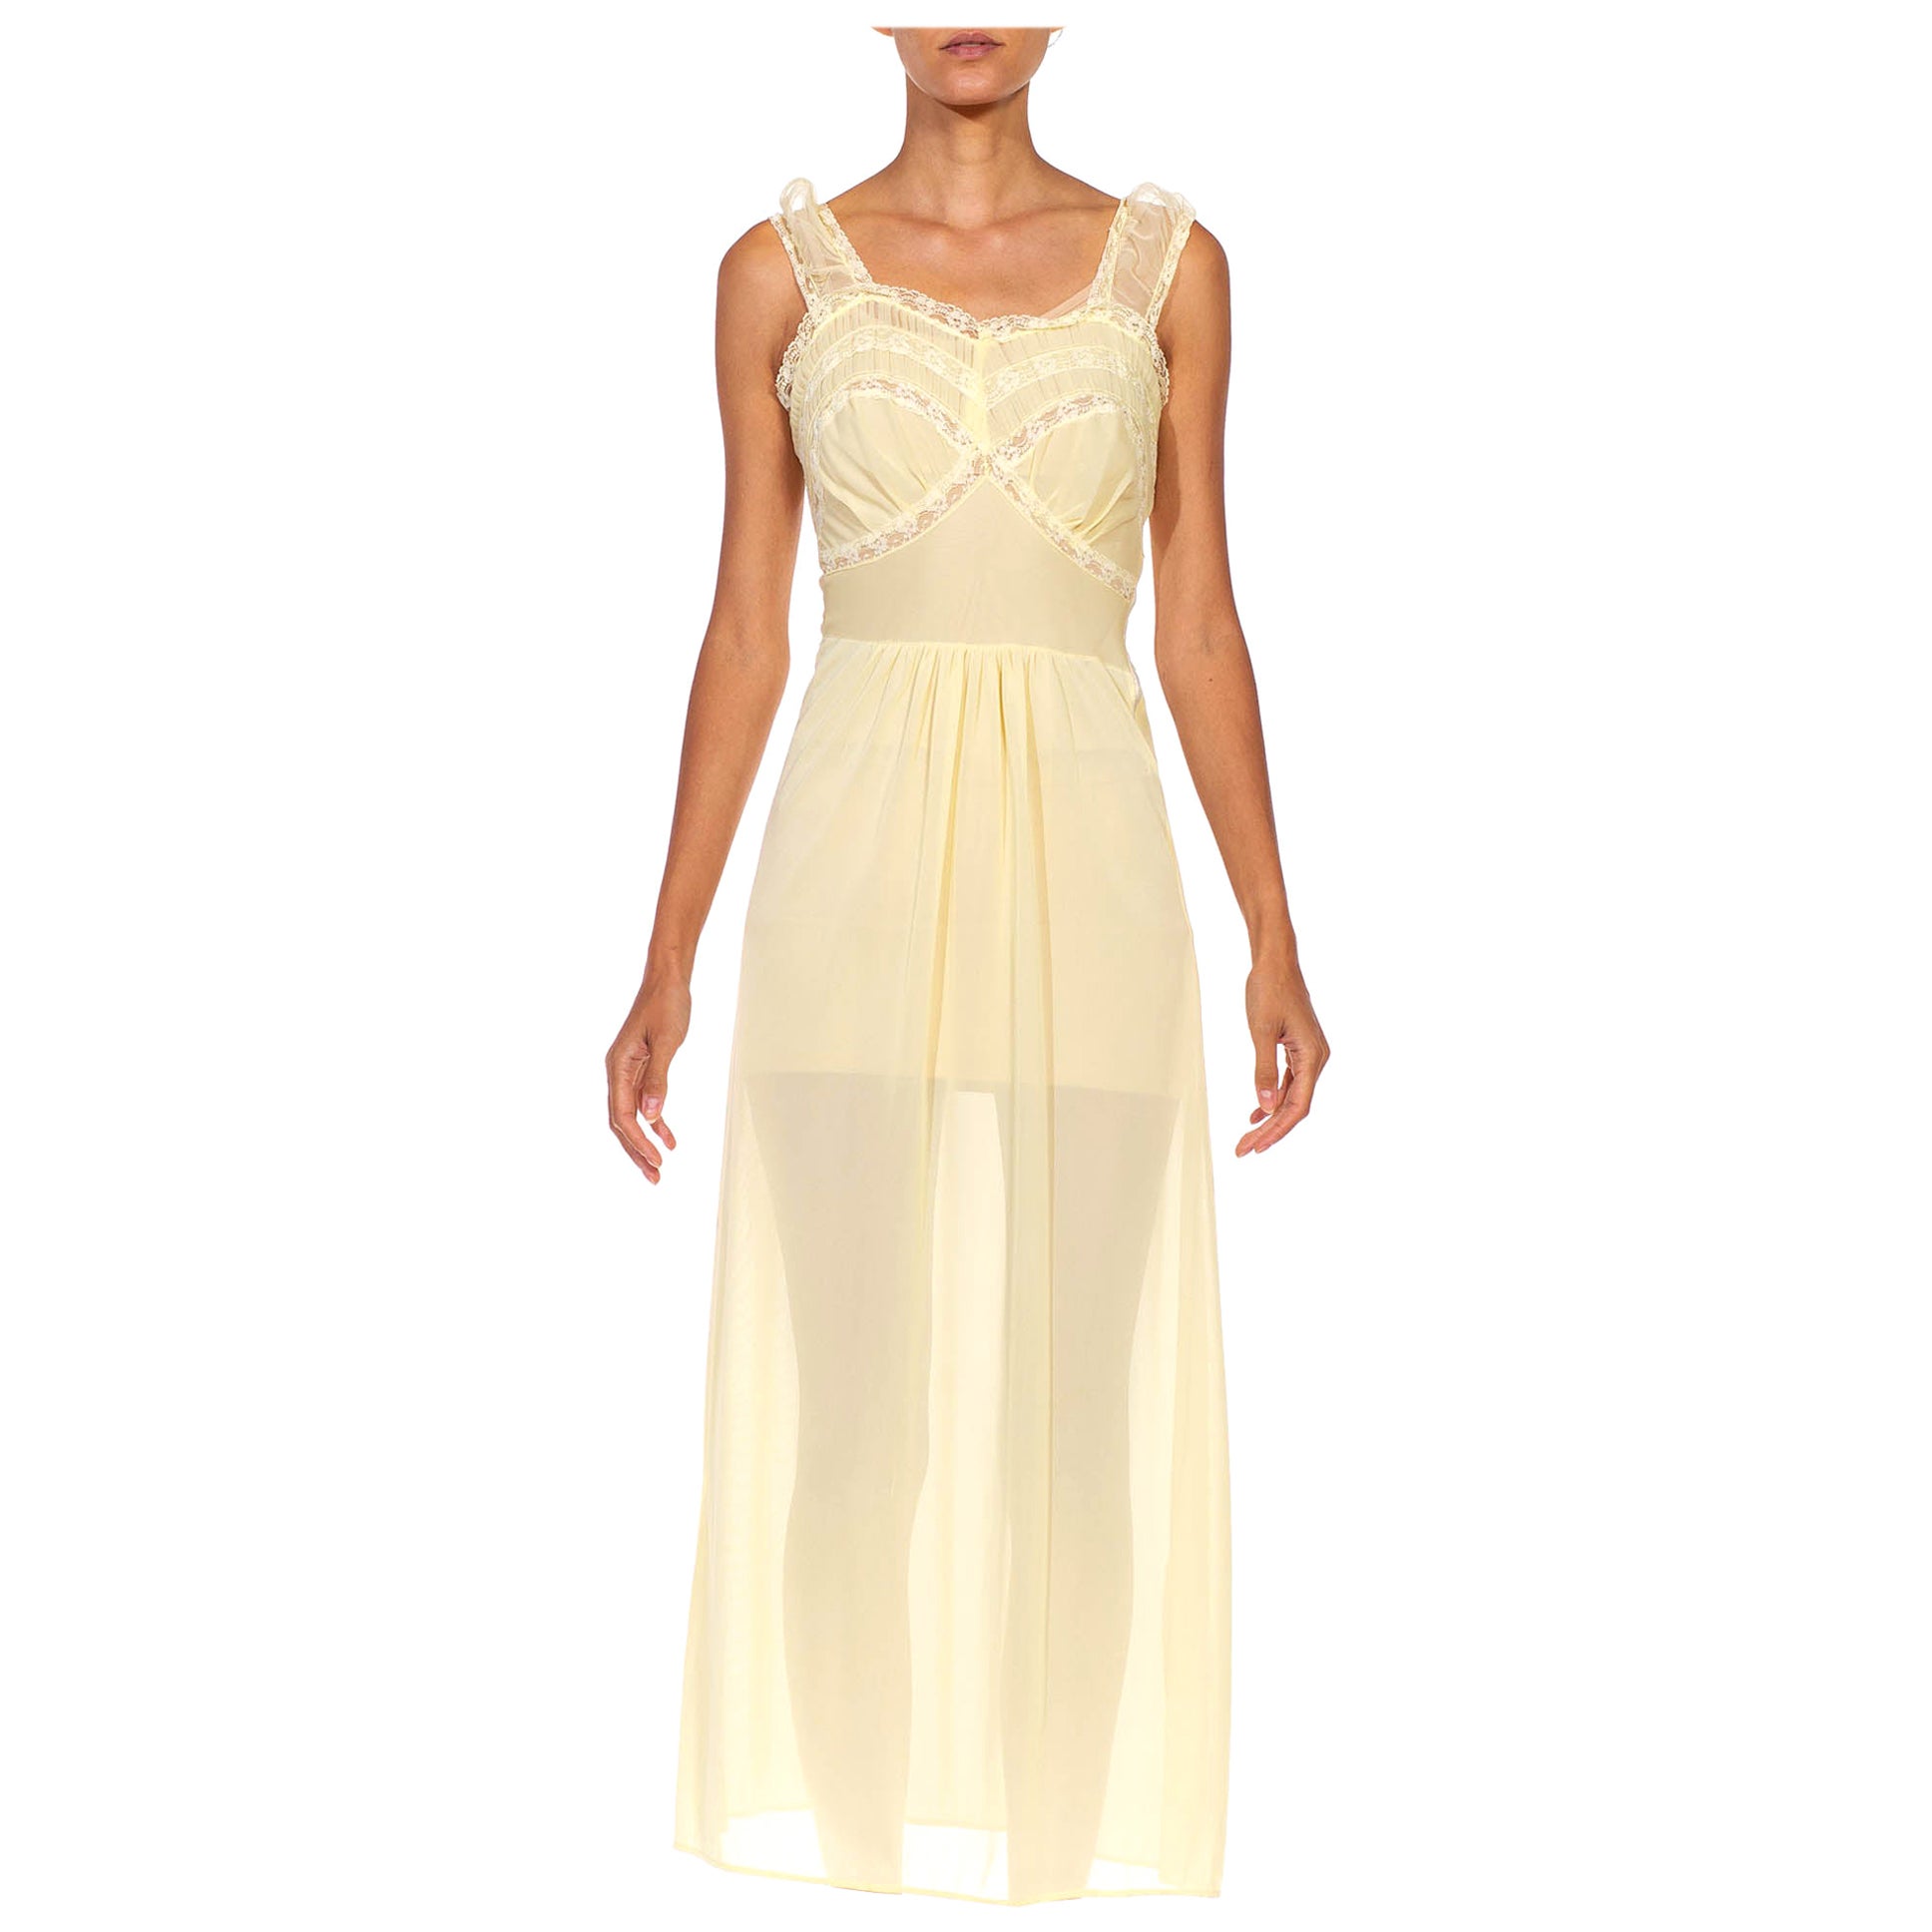 1940S Butter Yellow Rayon Lace Trim Negligee